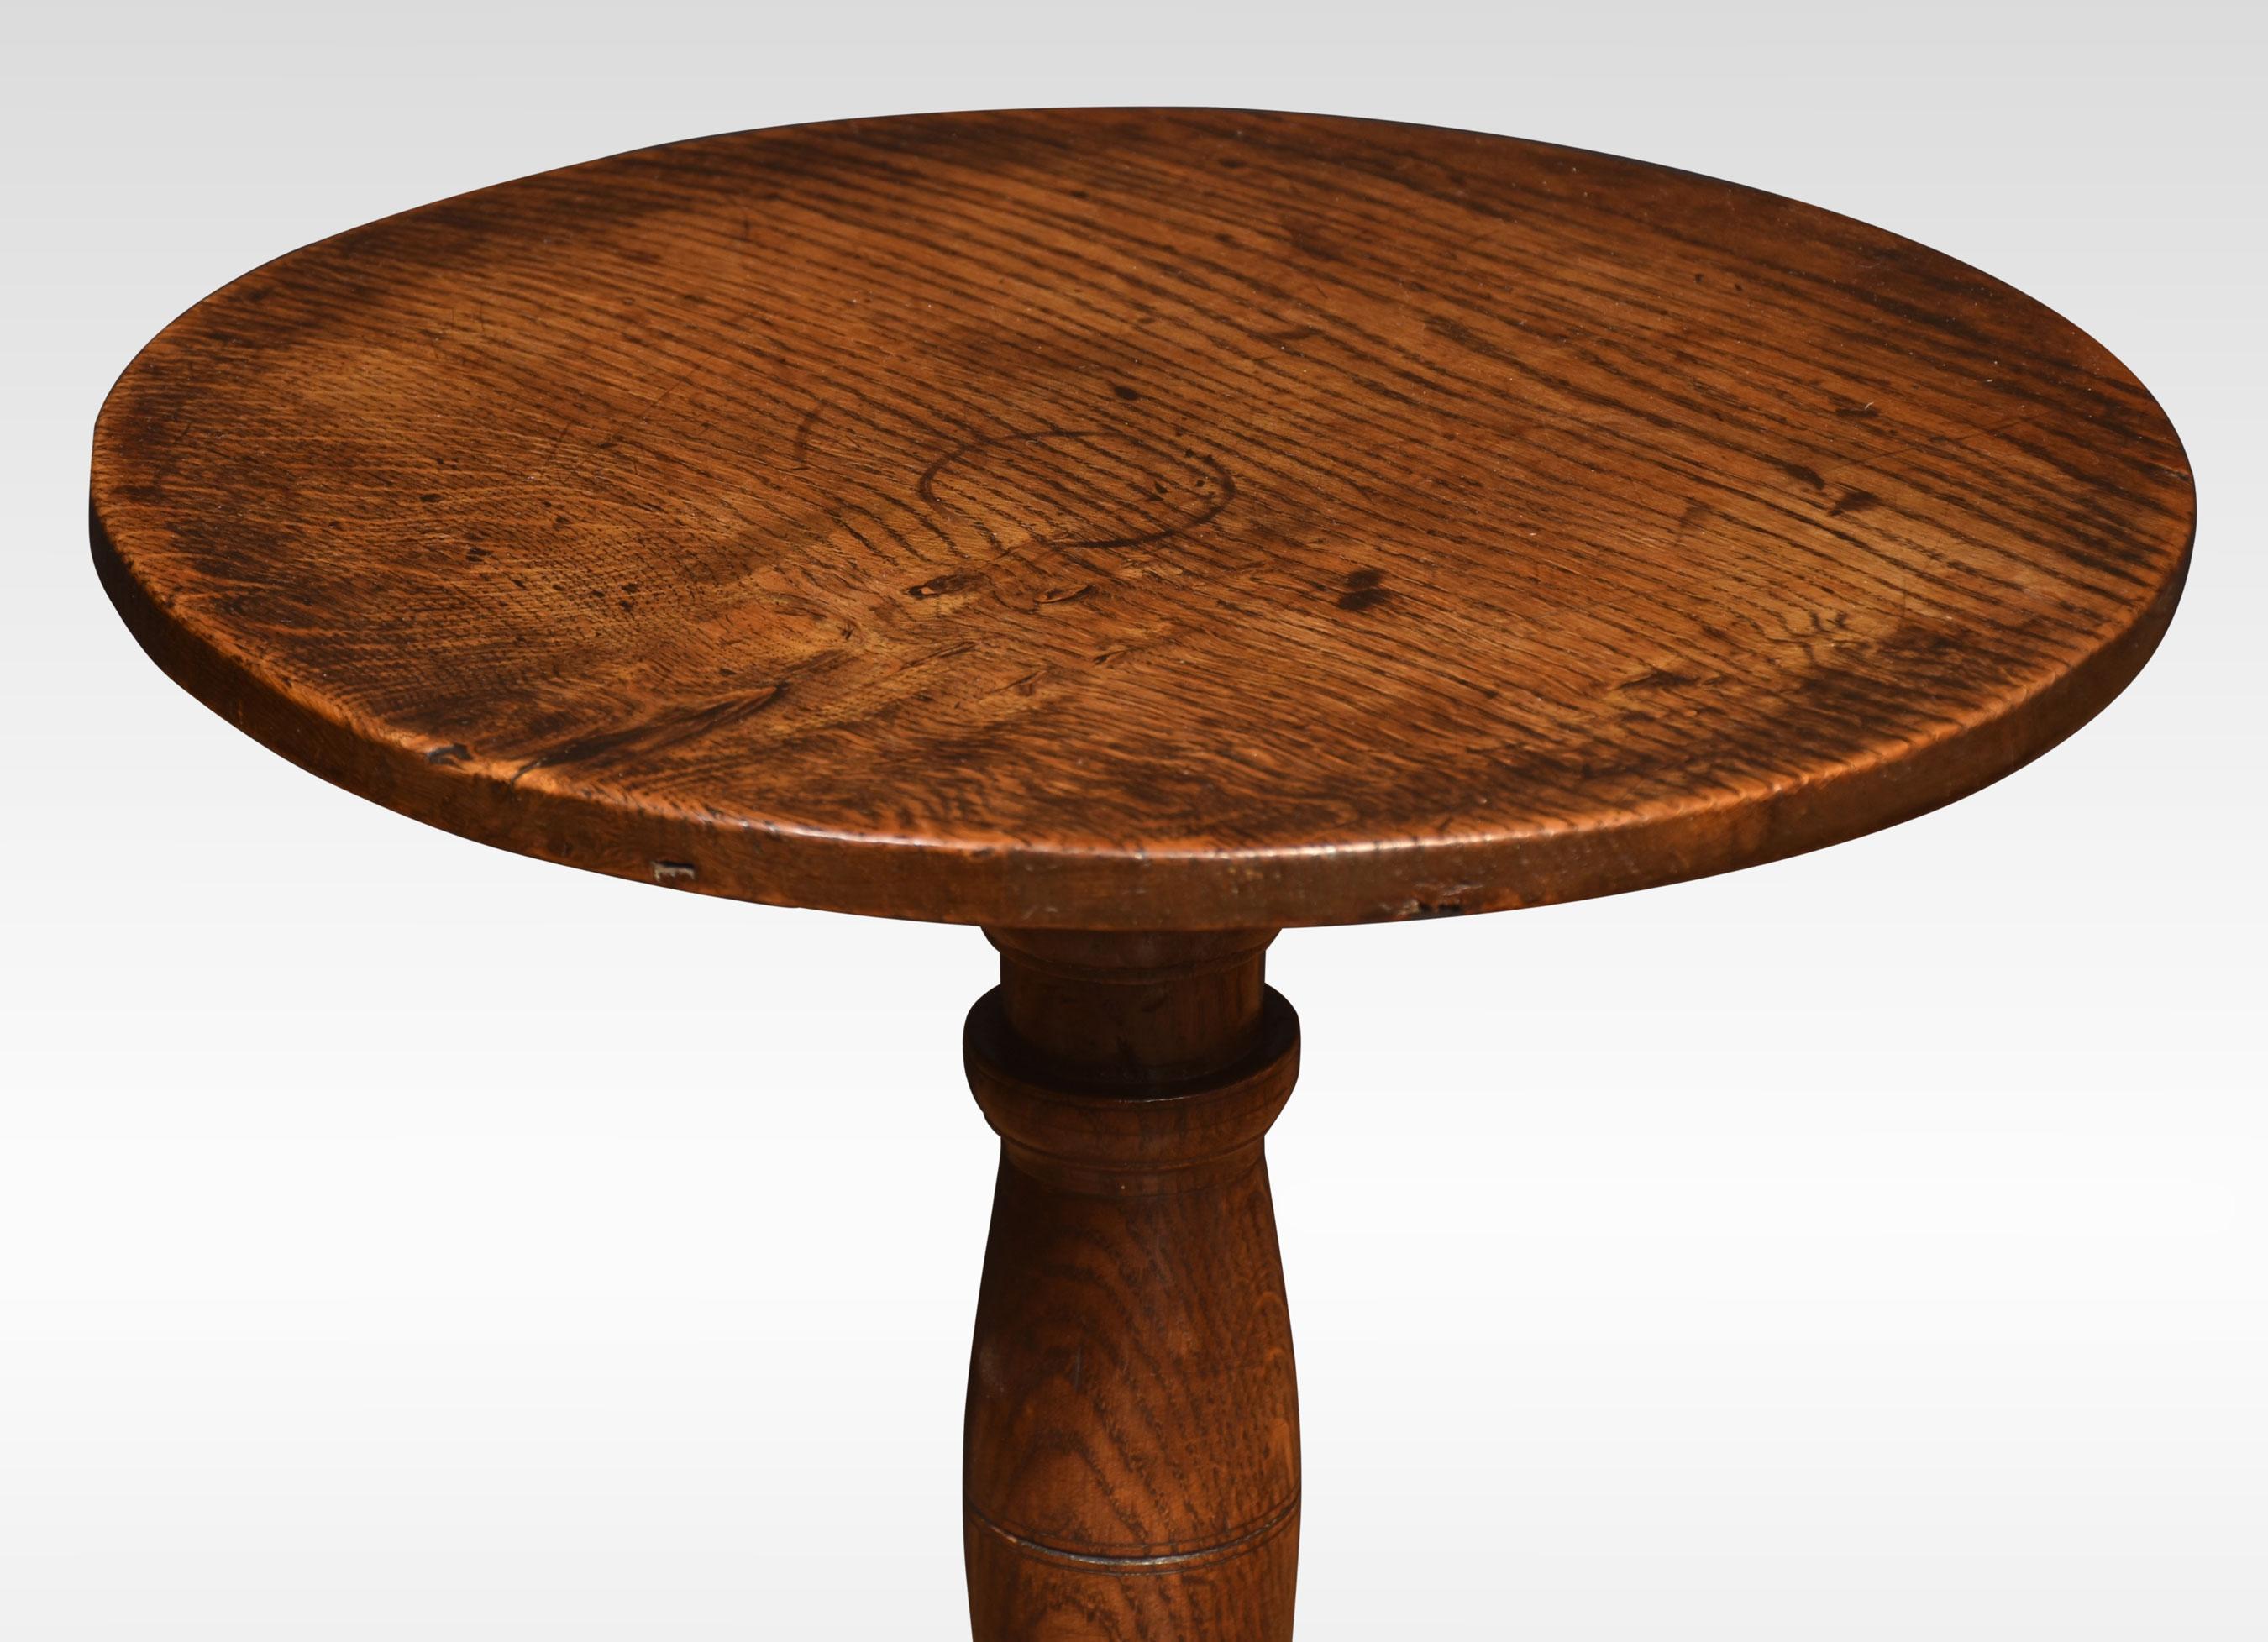 Oak tripod table of unusual form having a small circular top raised up on turned stem and three large cabriole supports.
Dimensions
Height 26 Inches
Width 22.5 Inches
Depth 22.5 Inches